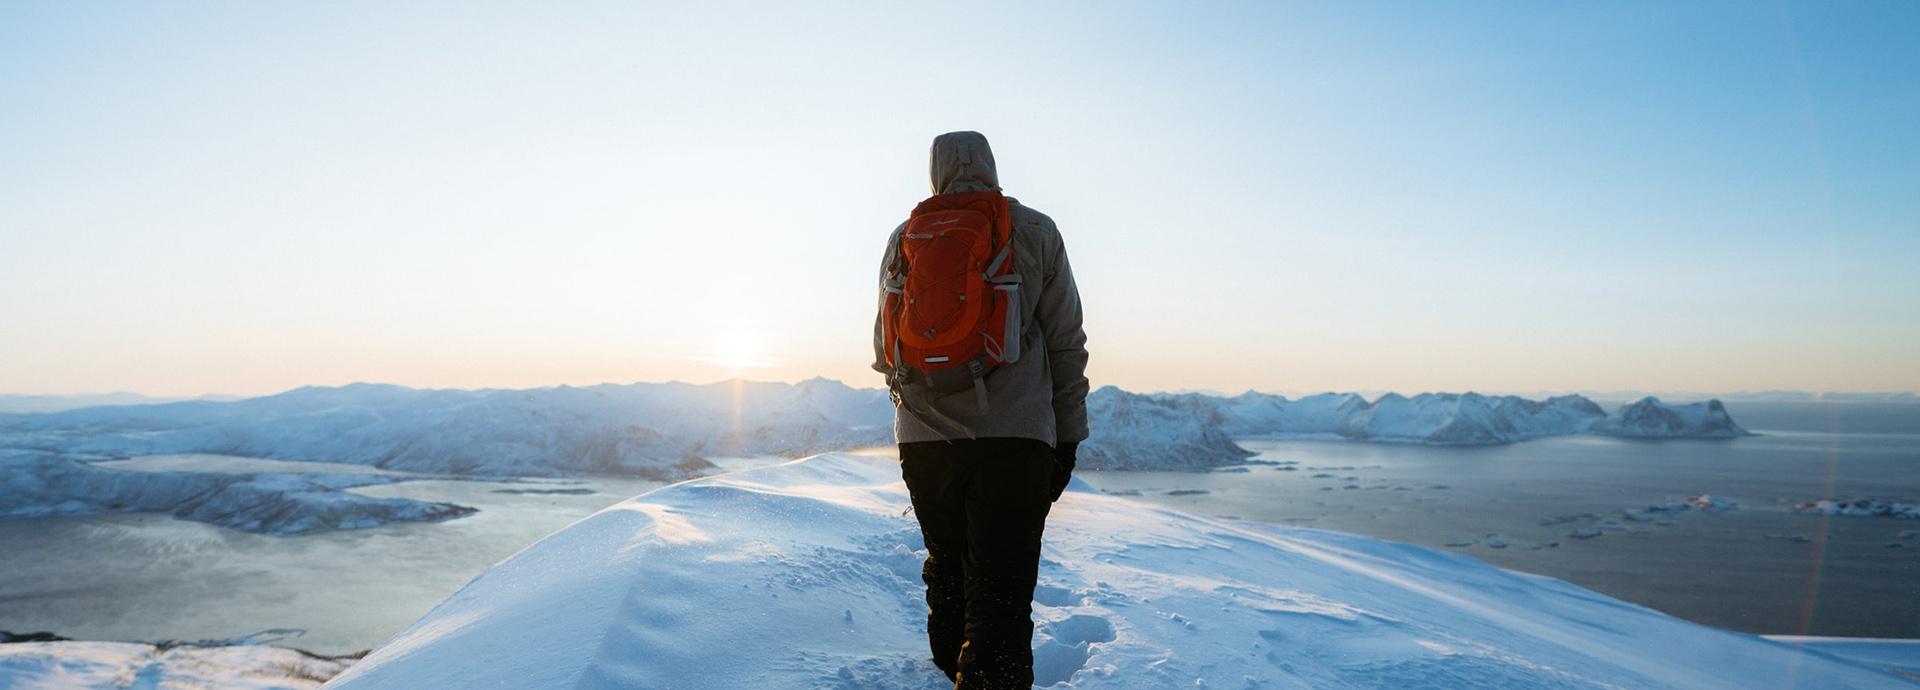 A person is standing on a snowy hill looking at a view that has snowy mountains and frozen sea.